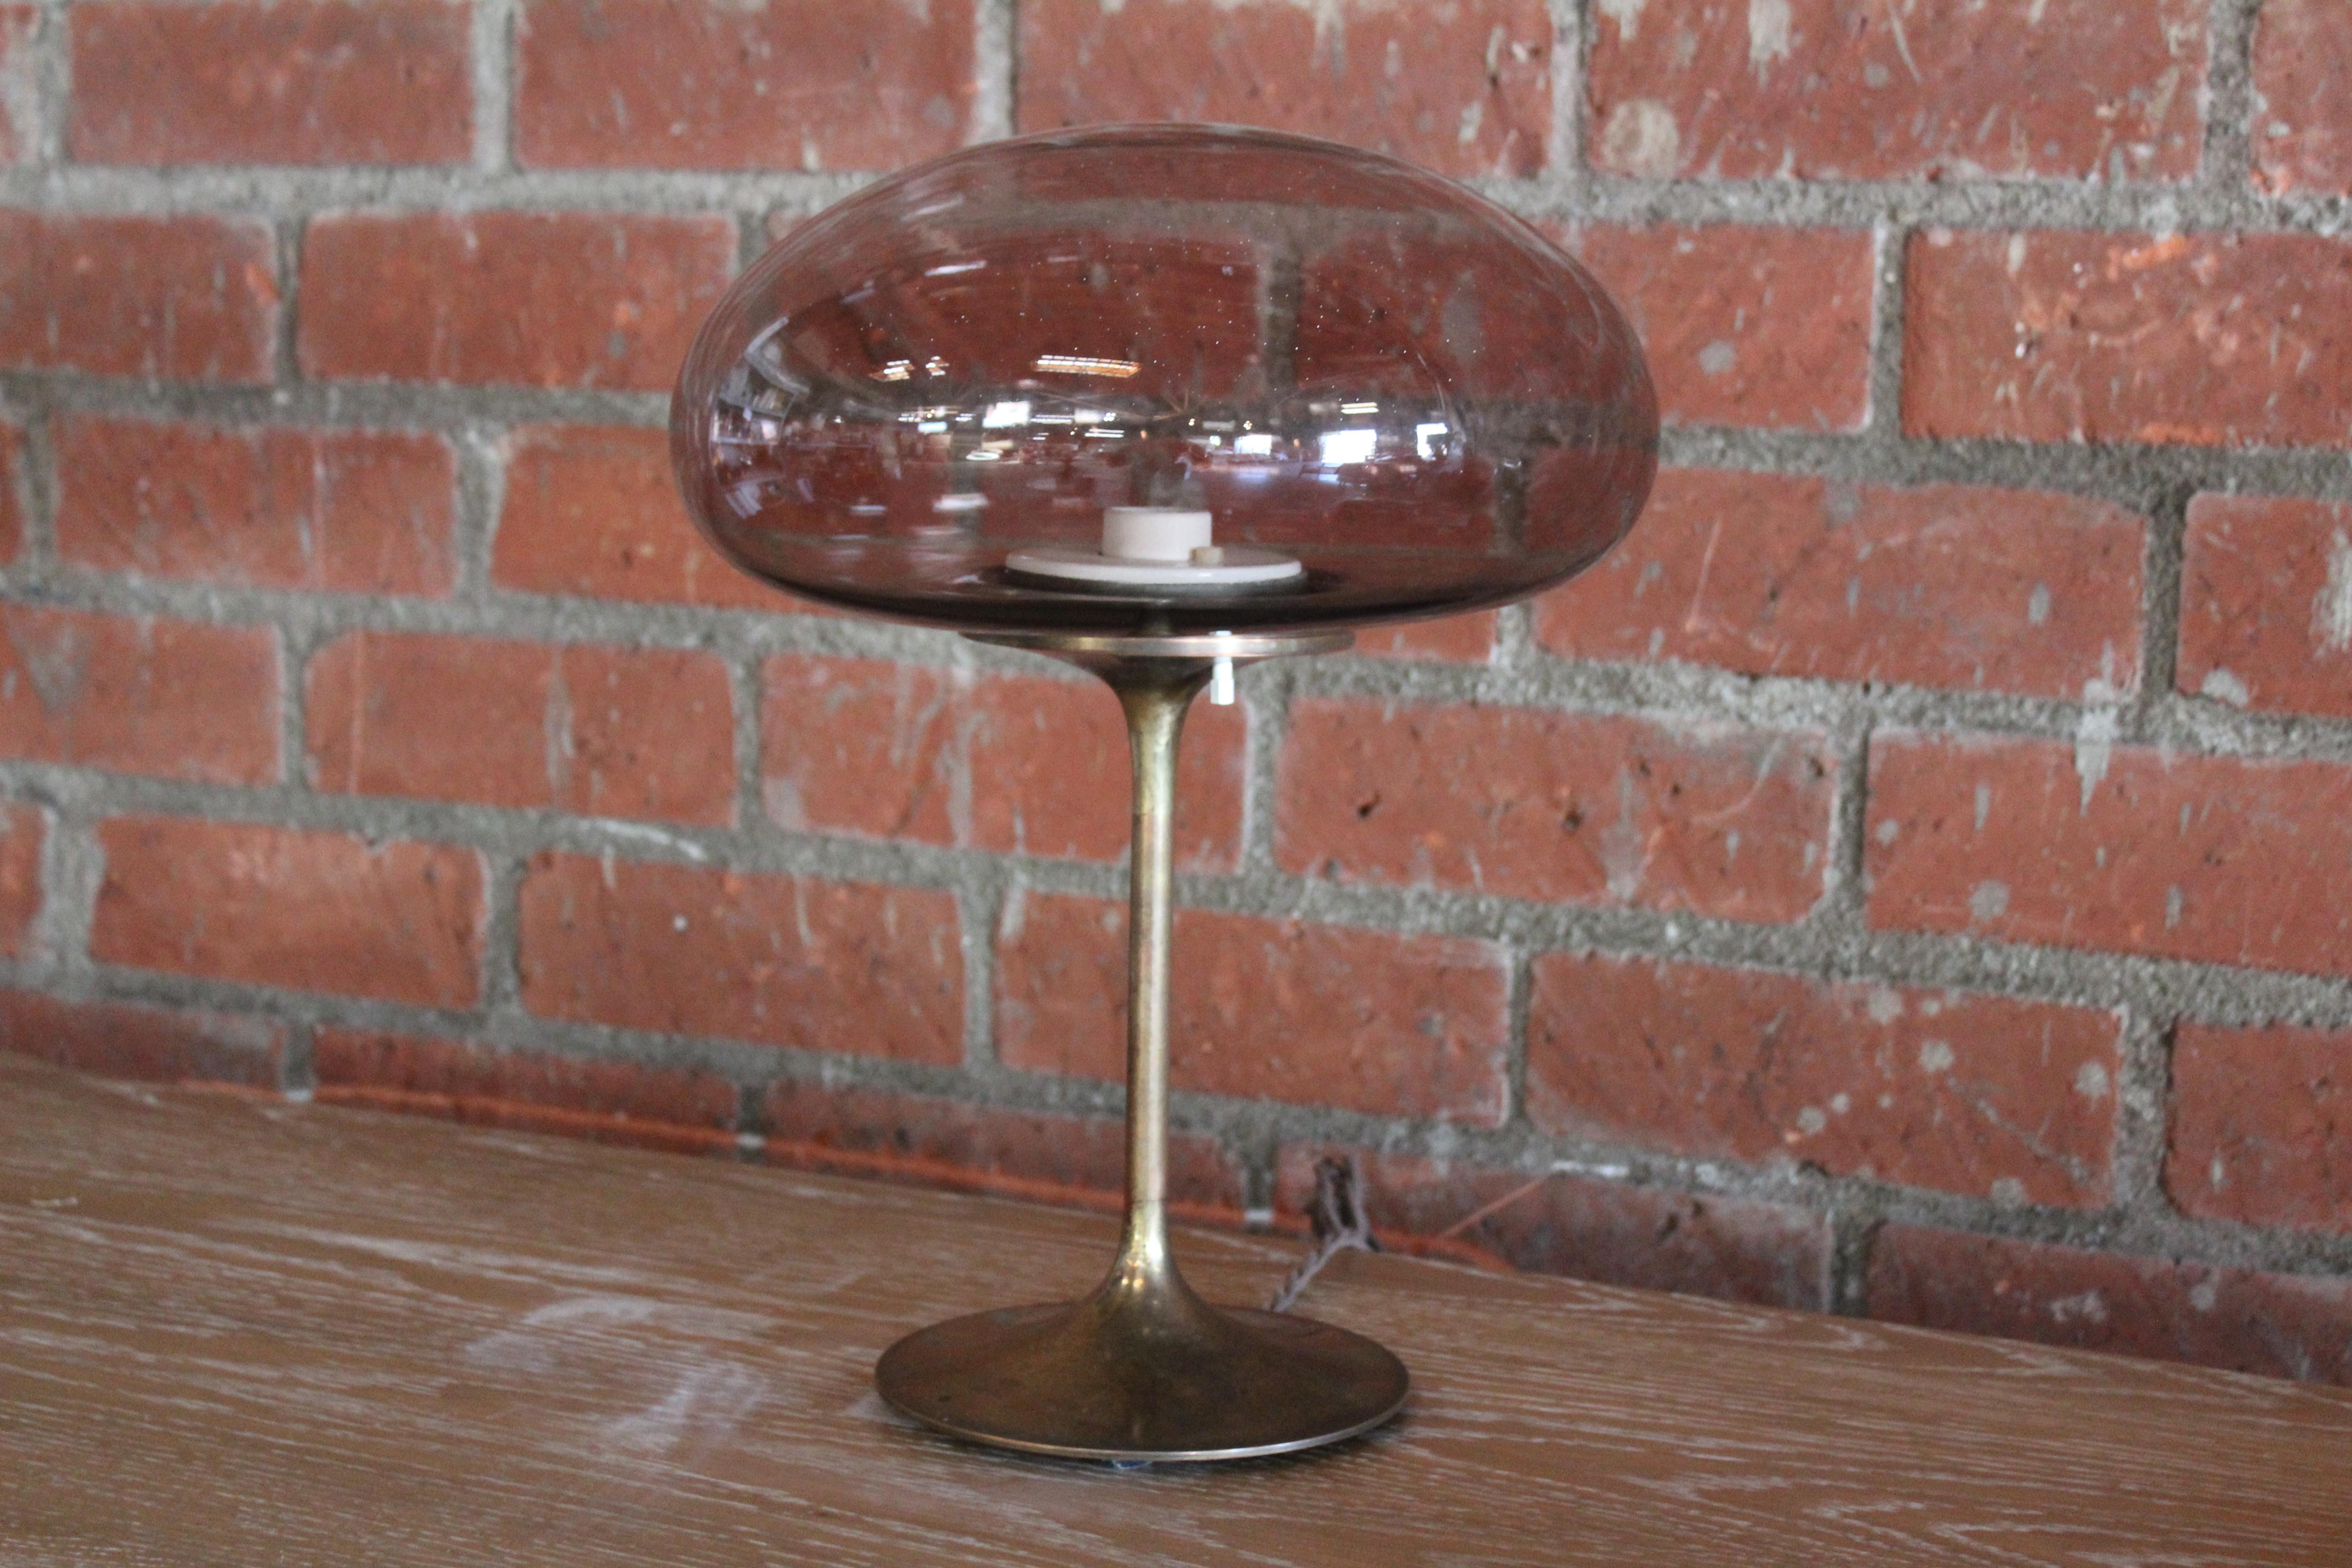 A vintage brass stemlite mushroom lamp by Bill Curry, manufactured in El Segundo, California in the 1960s. Features original smoked glass shade. Newly rewired. In overall wonderful condition with patina to the brass.